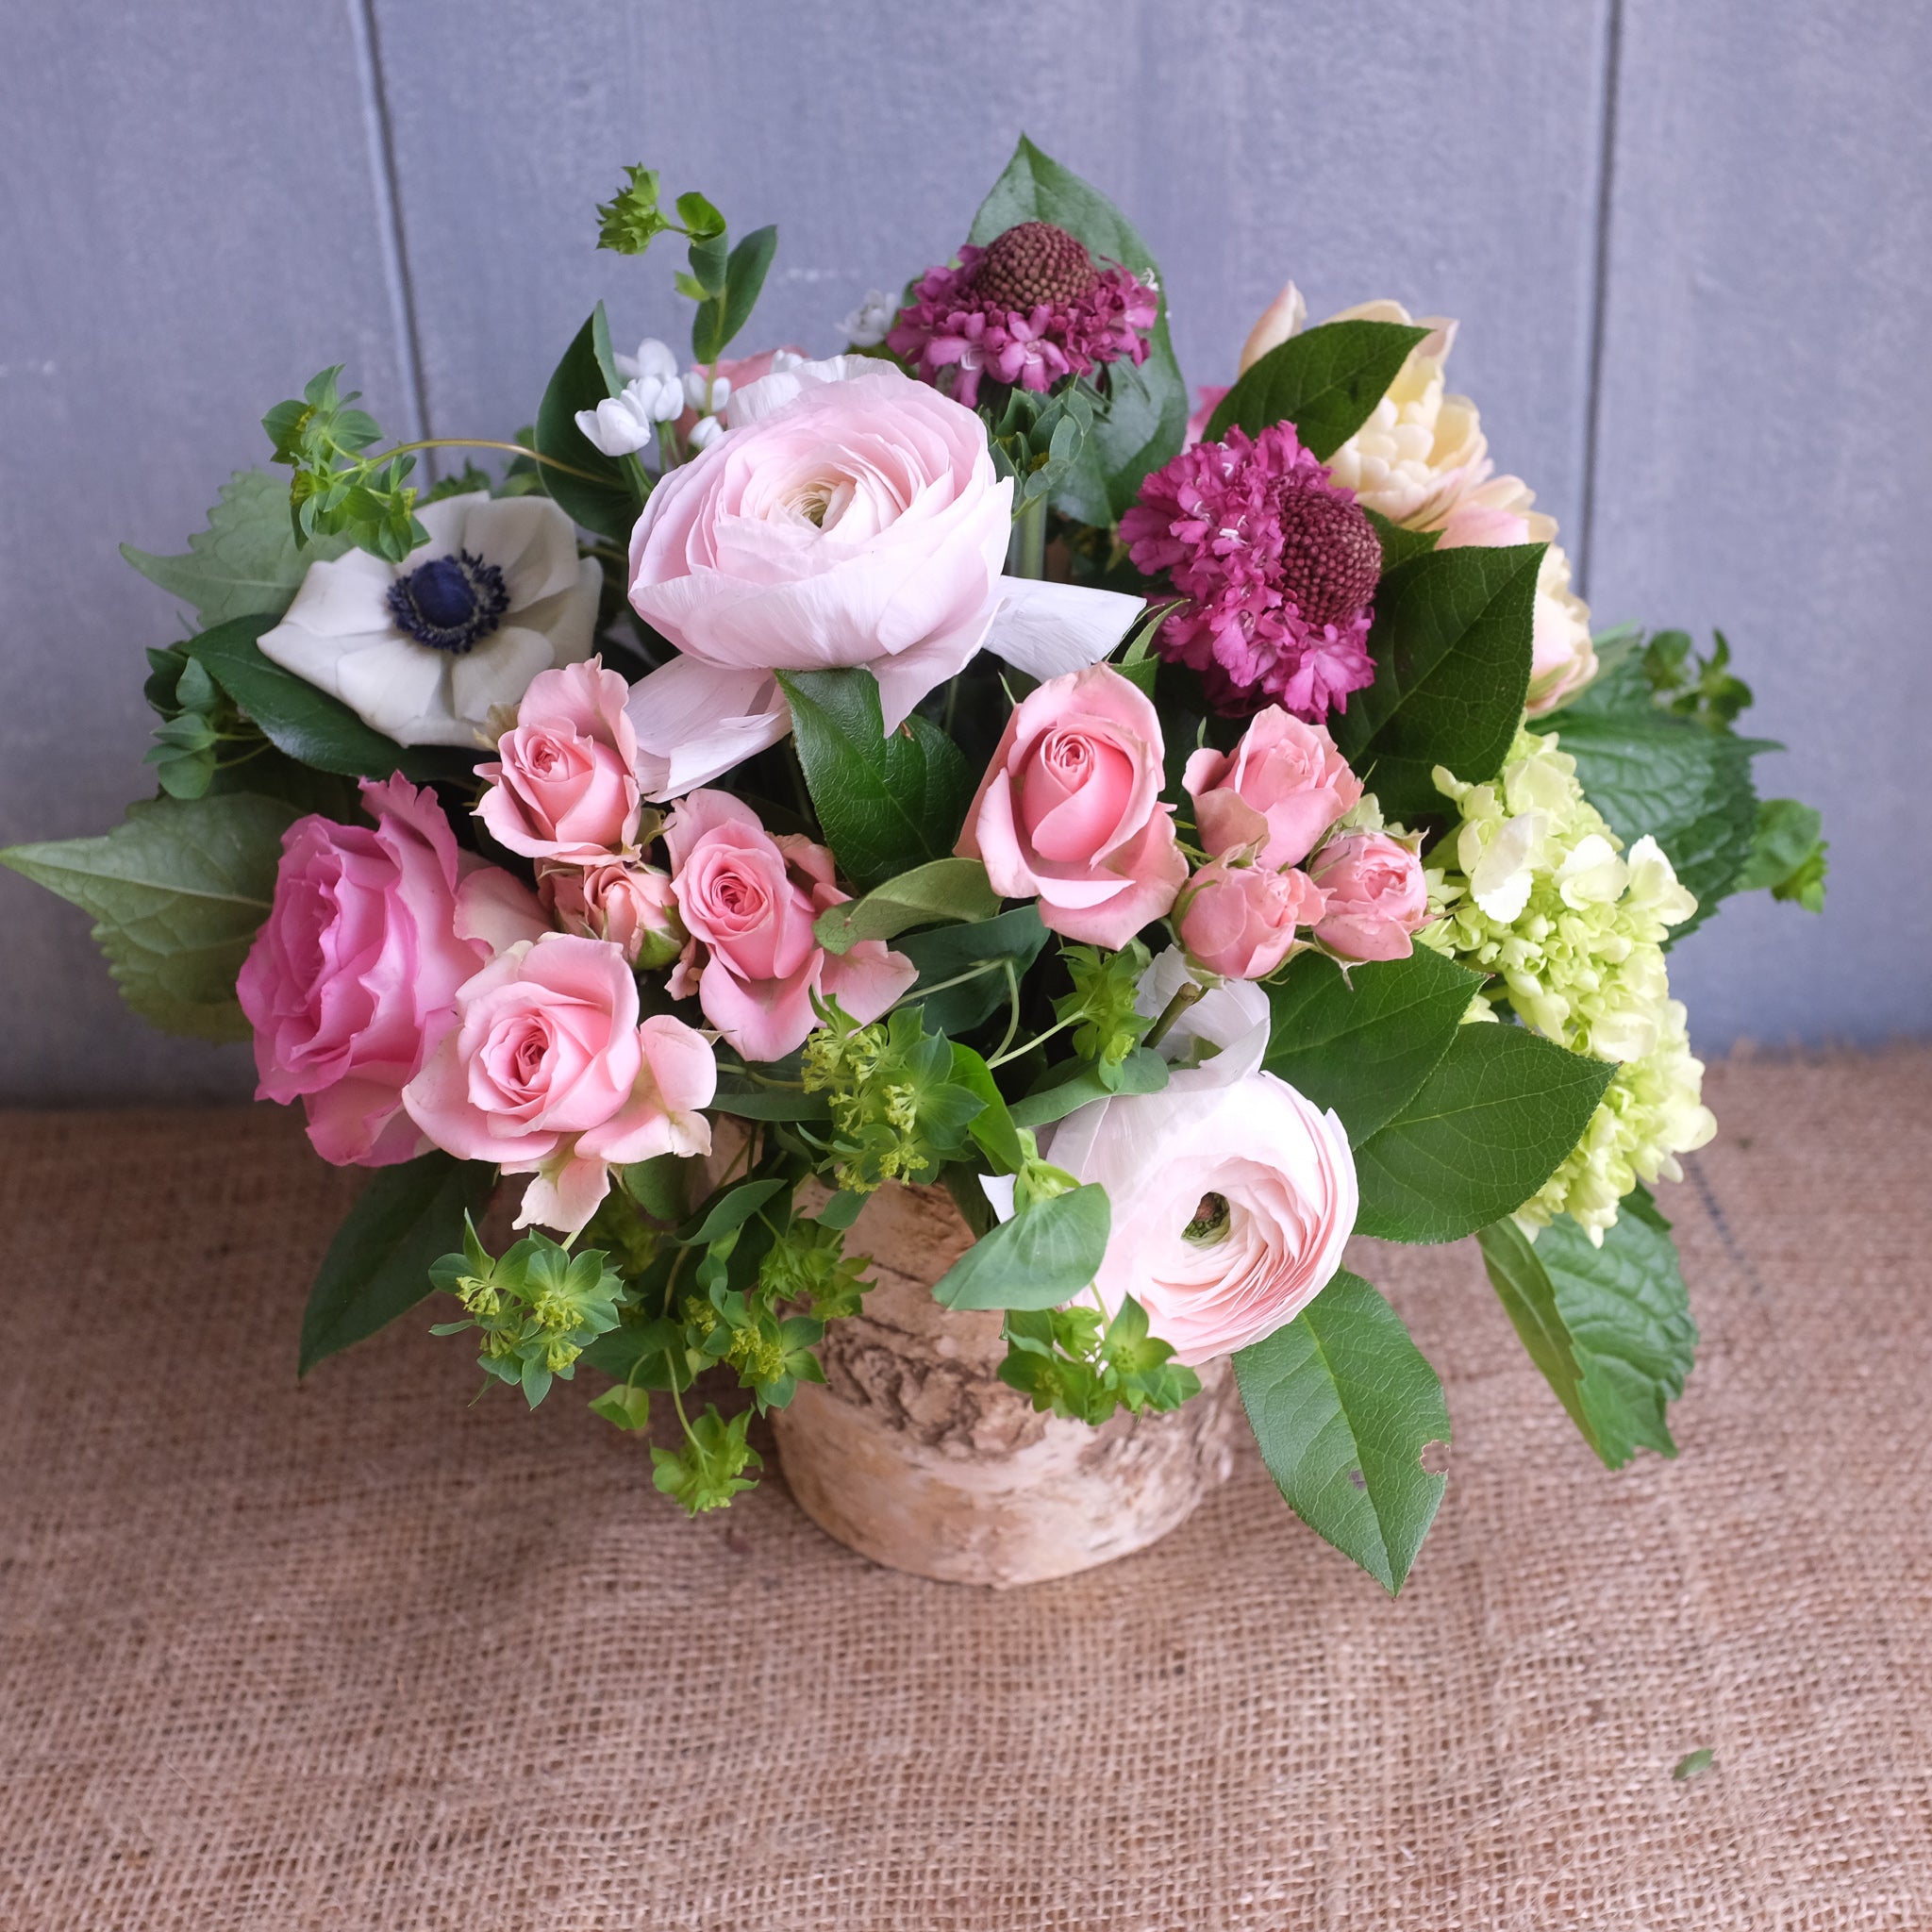 Flower Design with: Clooney Ranunculus, Roses, Scabiosa, Anemones by Michler's Florist